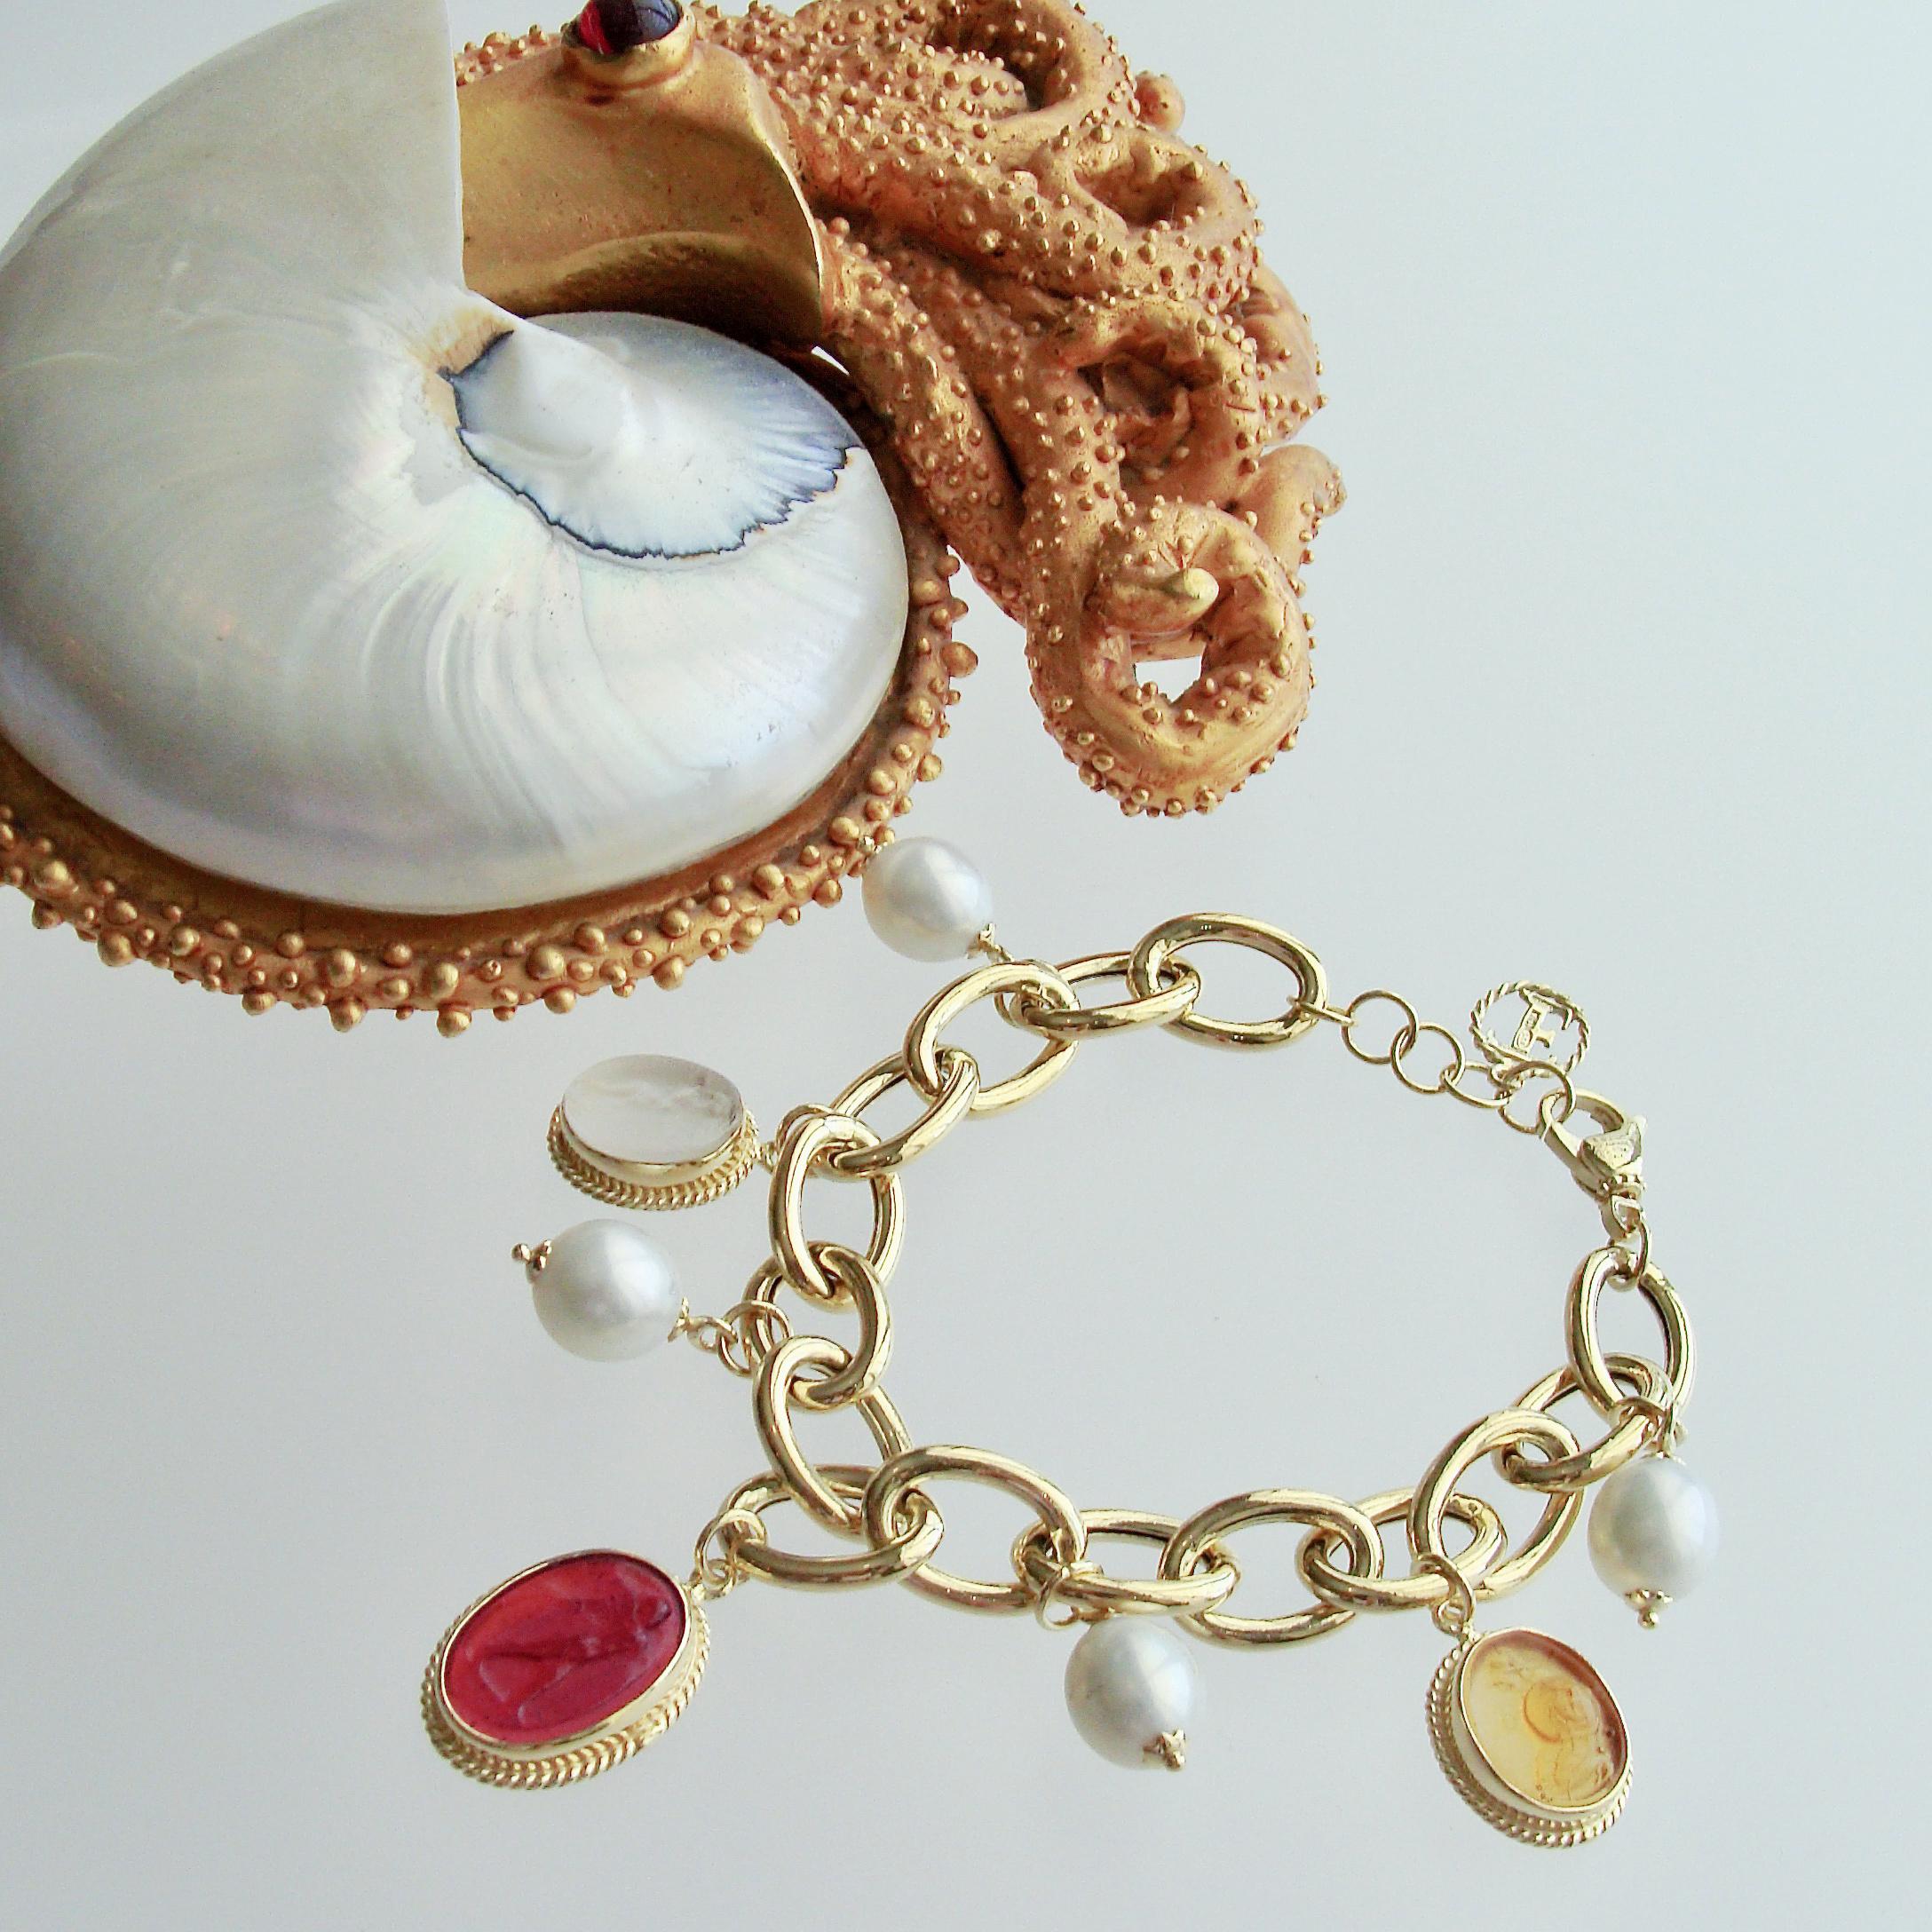 A unique gold vermeil link bracelet  has been artfully adorned with three Venetian glass intaglio charms which alternate with smooth and creamy freshwater pearls.  Each of the intaglio charms has been carefully set into a millegrain bezel which